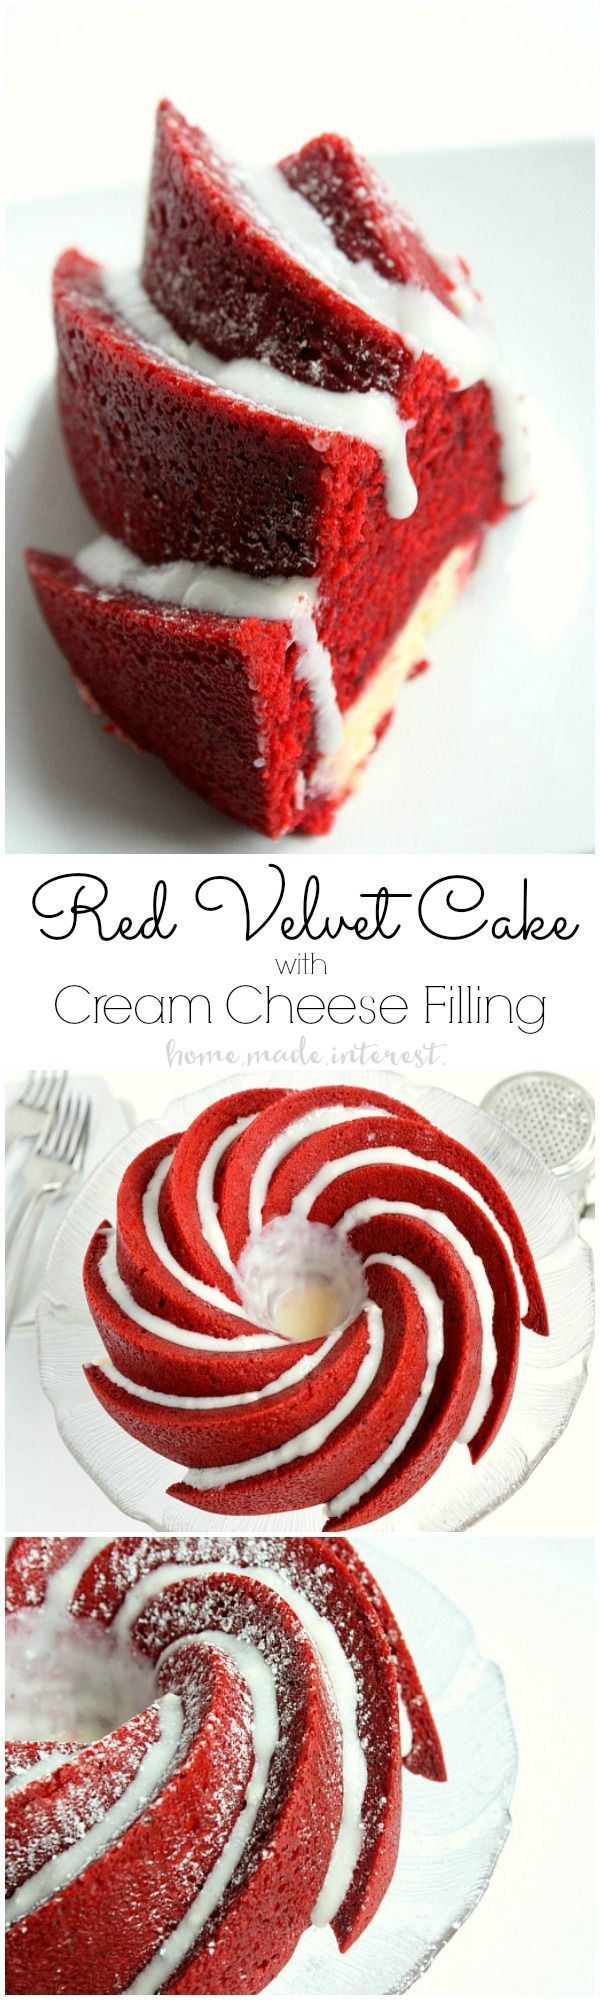 Get ready for Valentine’s Day with this Red Velvet Bundt Cake with cream cheese filling. It is a beautiful and easy